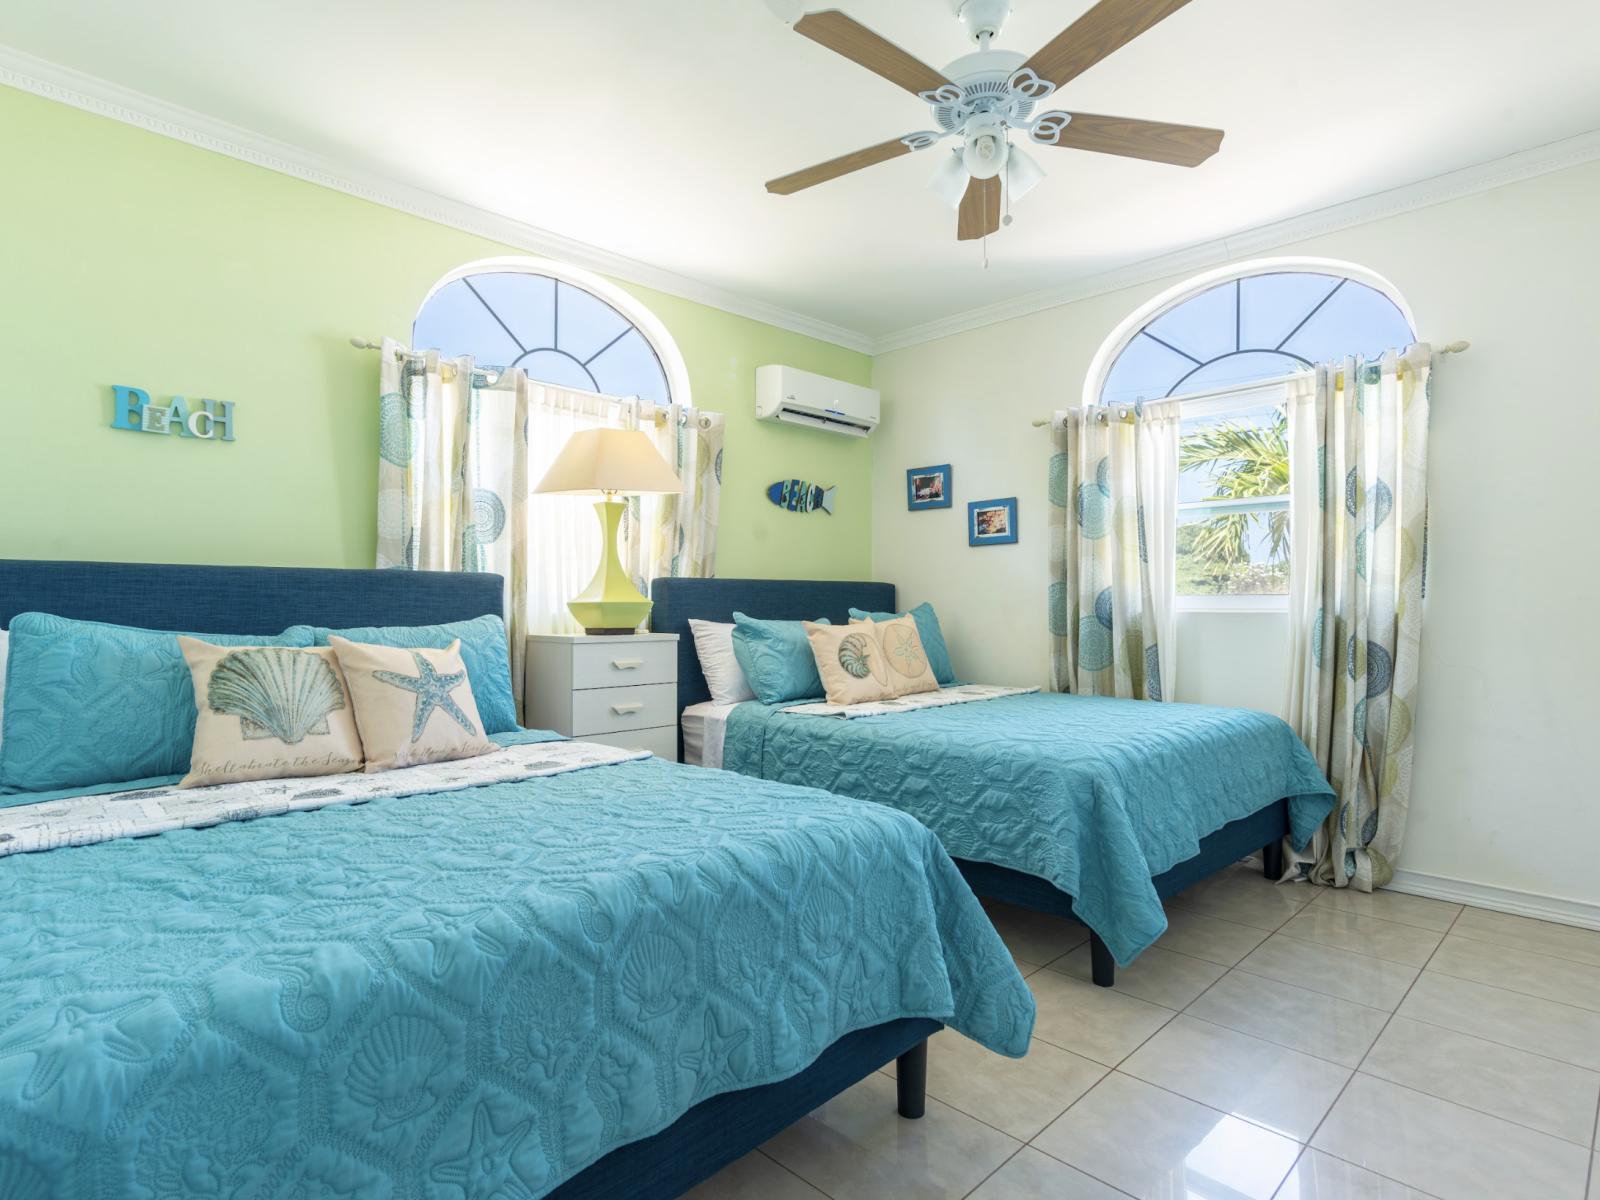 Embrace the essence of elegance and comfort in the bedroom of the home in Noord Aruba - Offers two queen size beds for restful night after long day for beach day fun -  Bedroom with a cozy ambiance, blending comfort and aesthetics